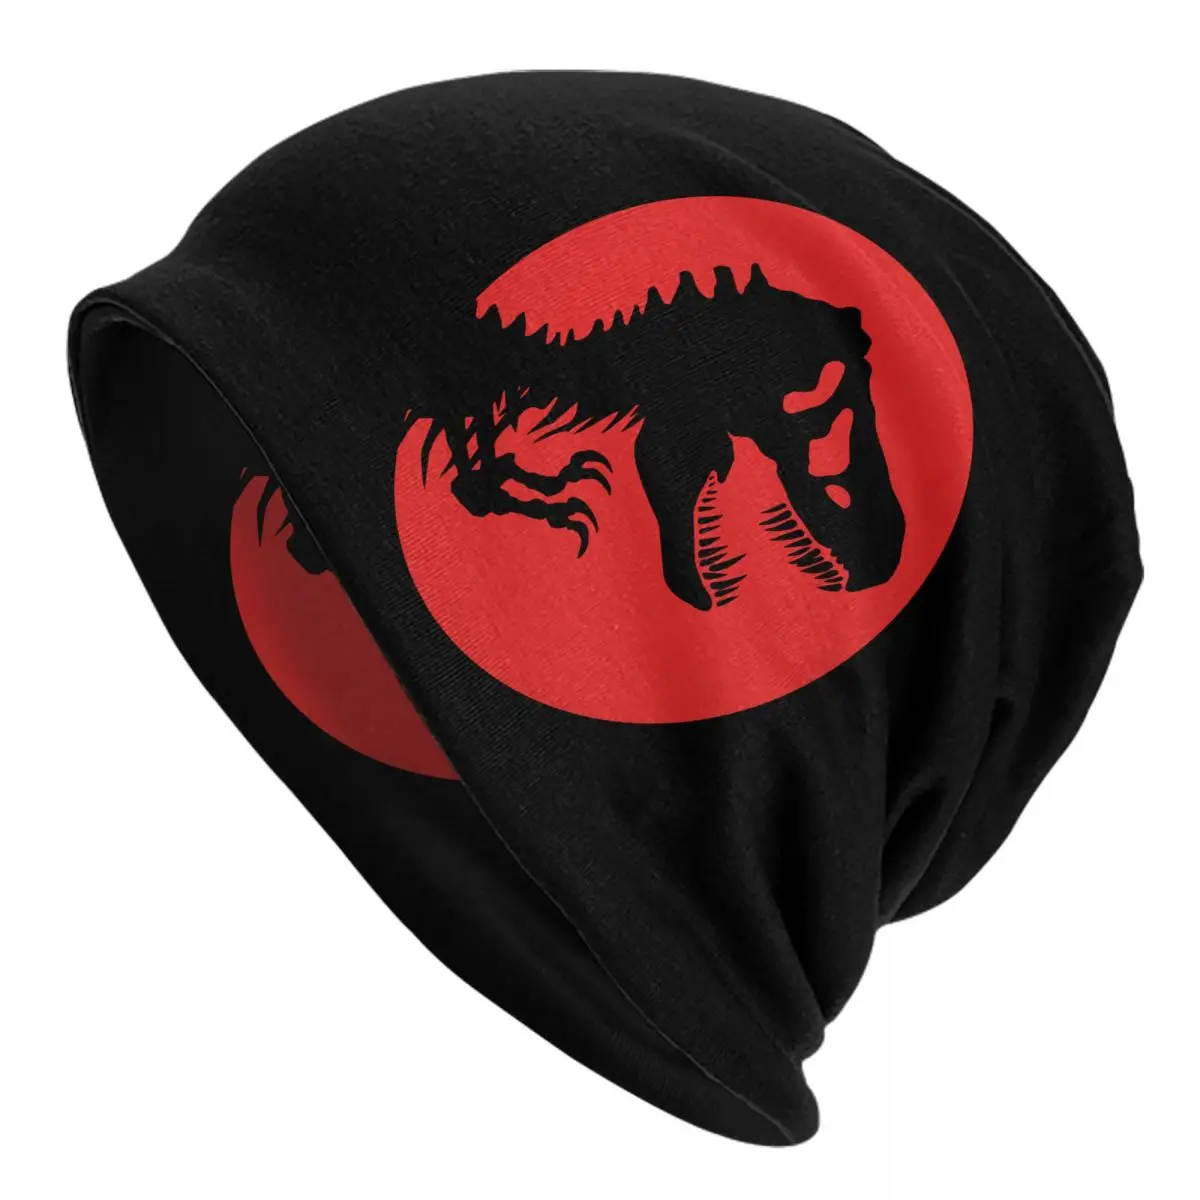 jurassic park the game Adult Men's Women's Knit Hat Keep warm winter knitted hat